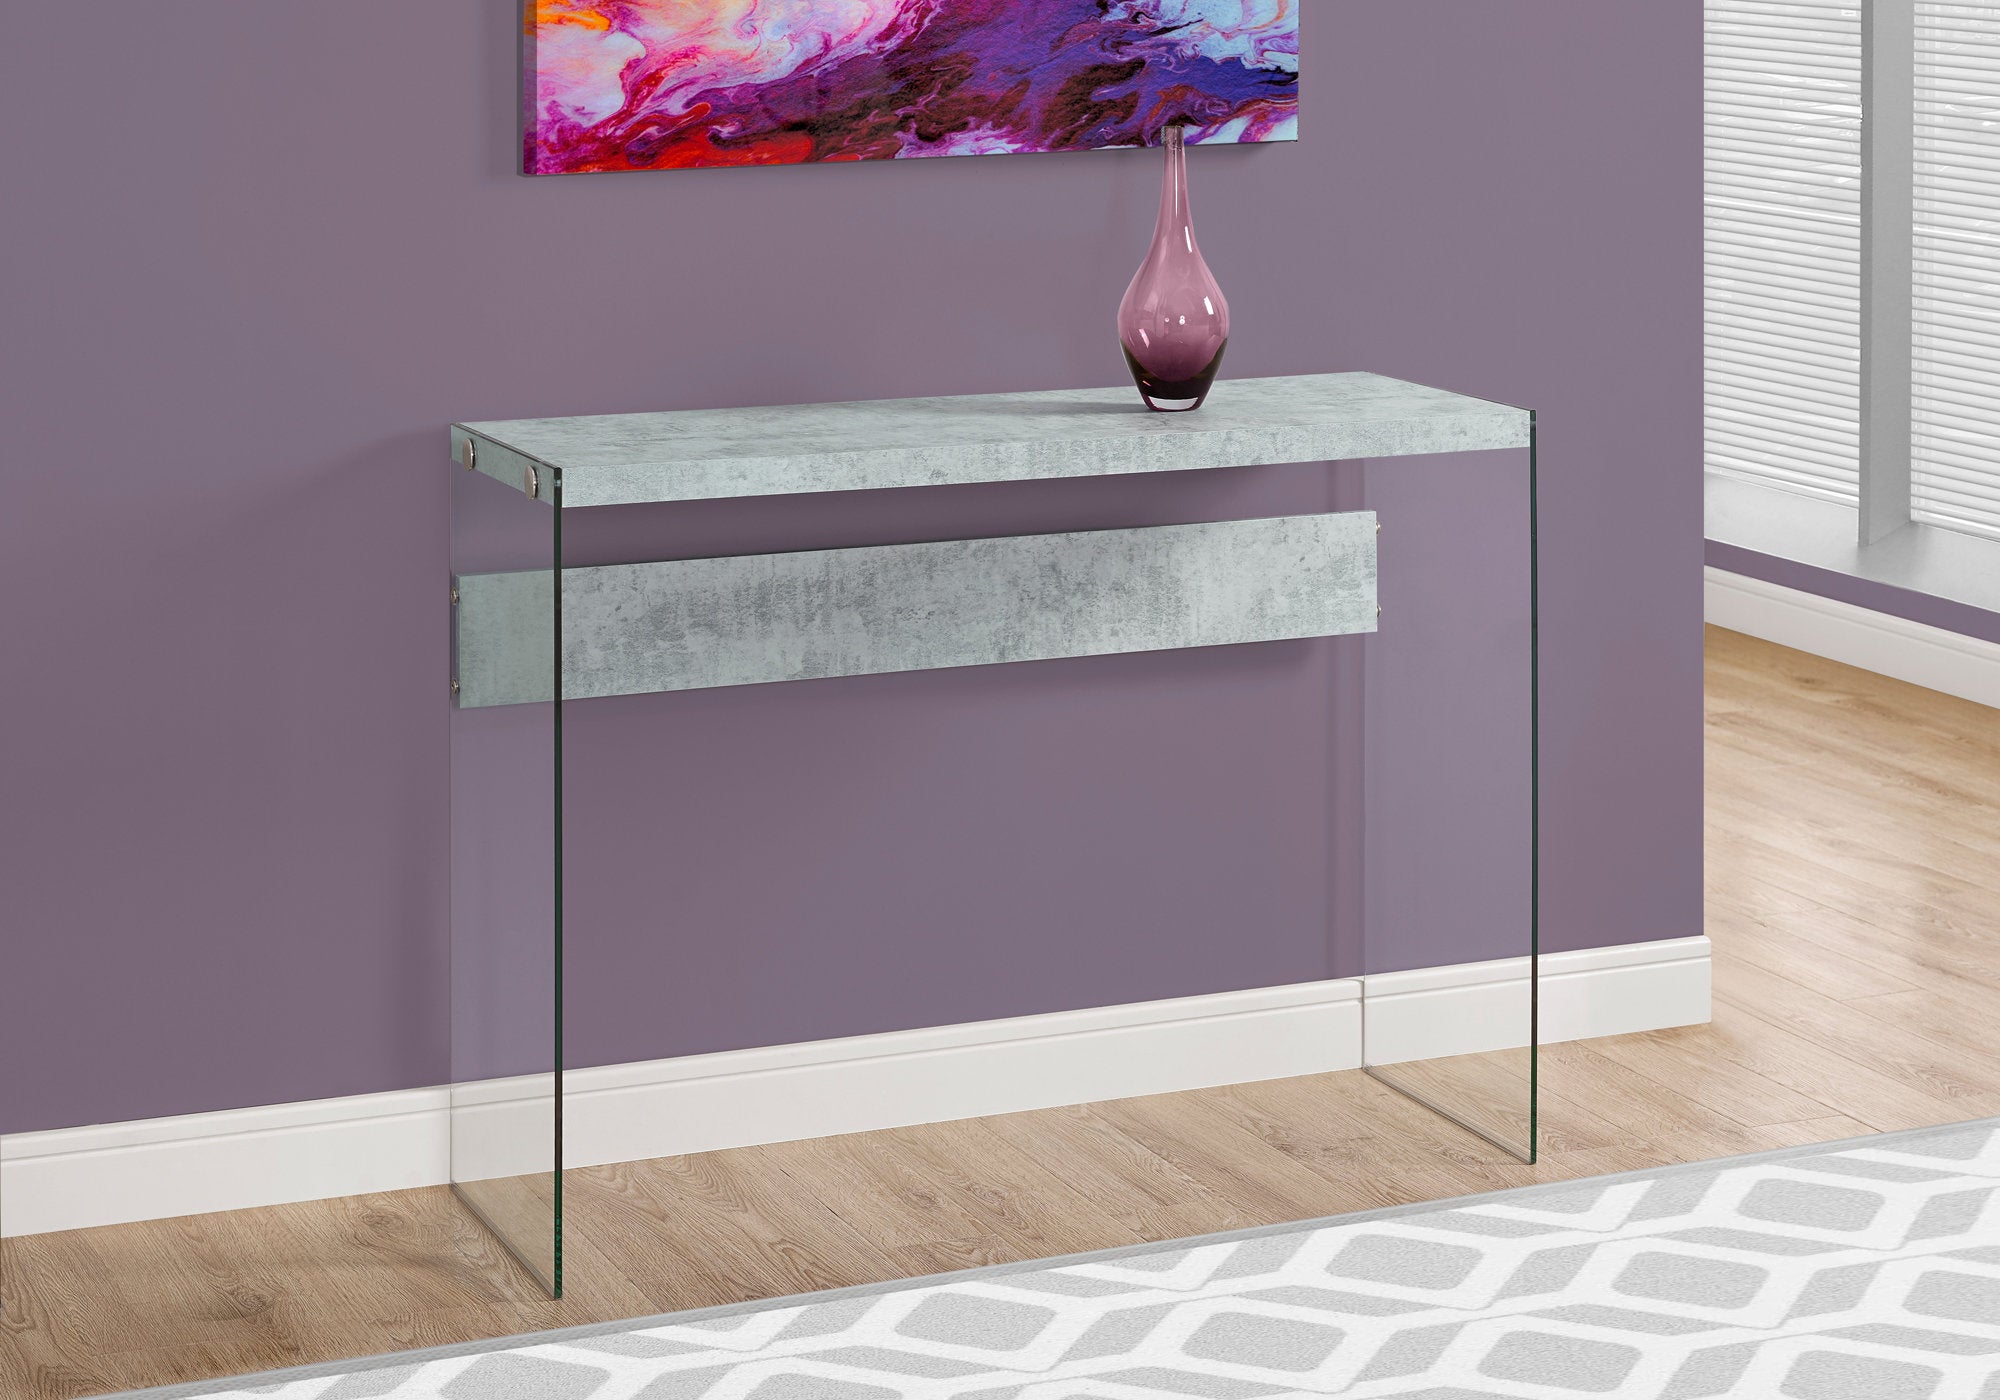 MN-793232    Accent Table, Console, Entryway, Narrow, Sofa, Living Room, Bedroom, Tempered Glass, Laminate, Grey Cement Look, Clear, Contemporary, Modern